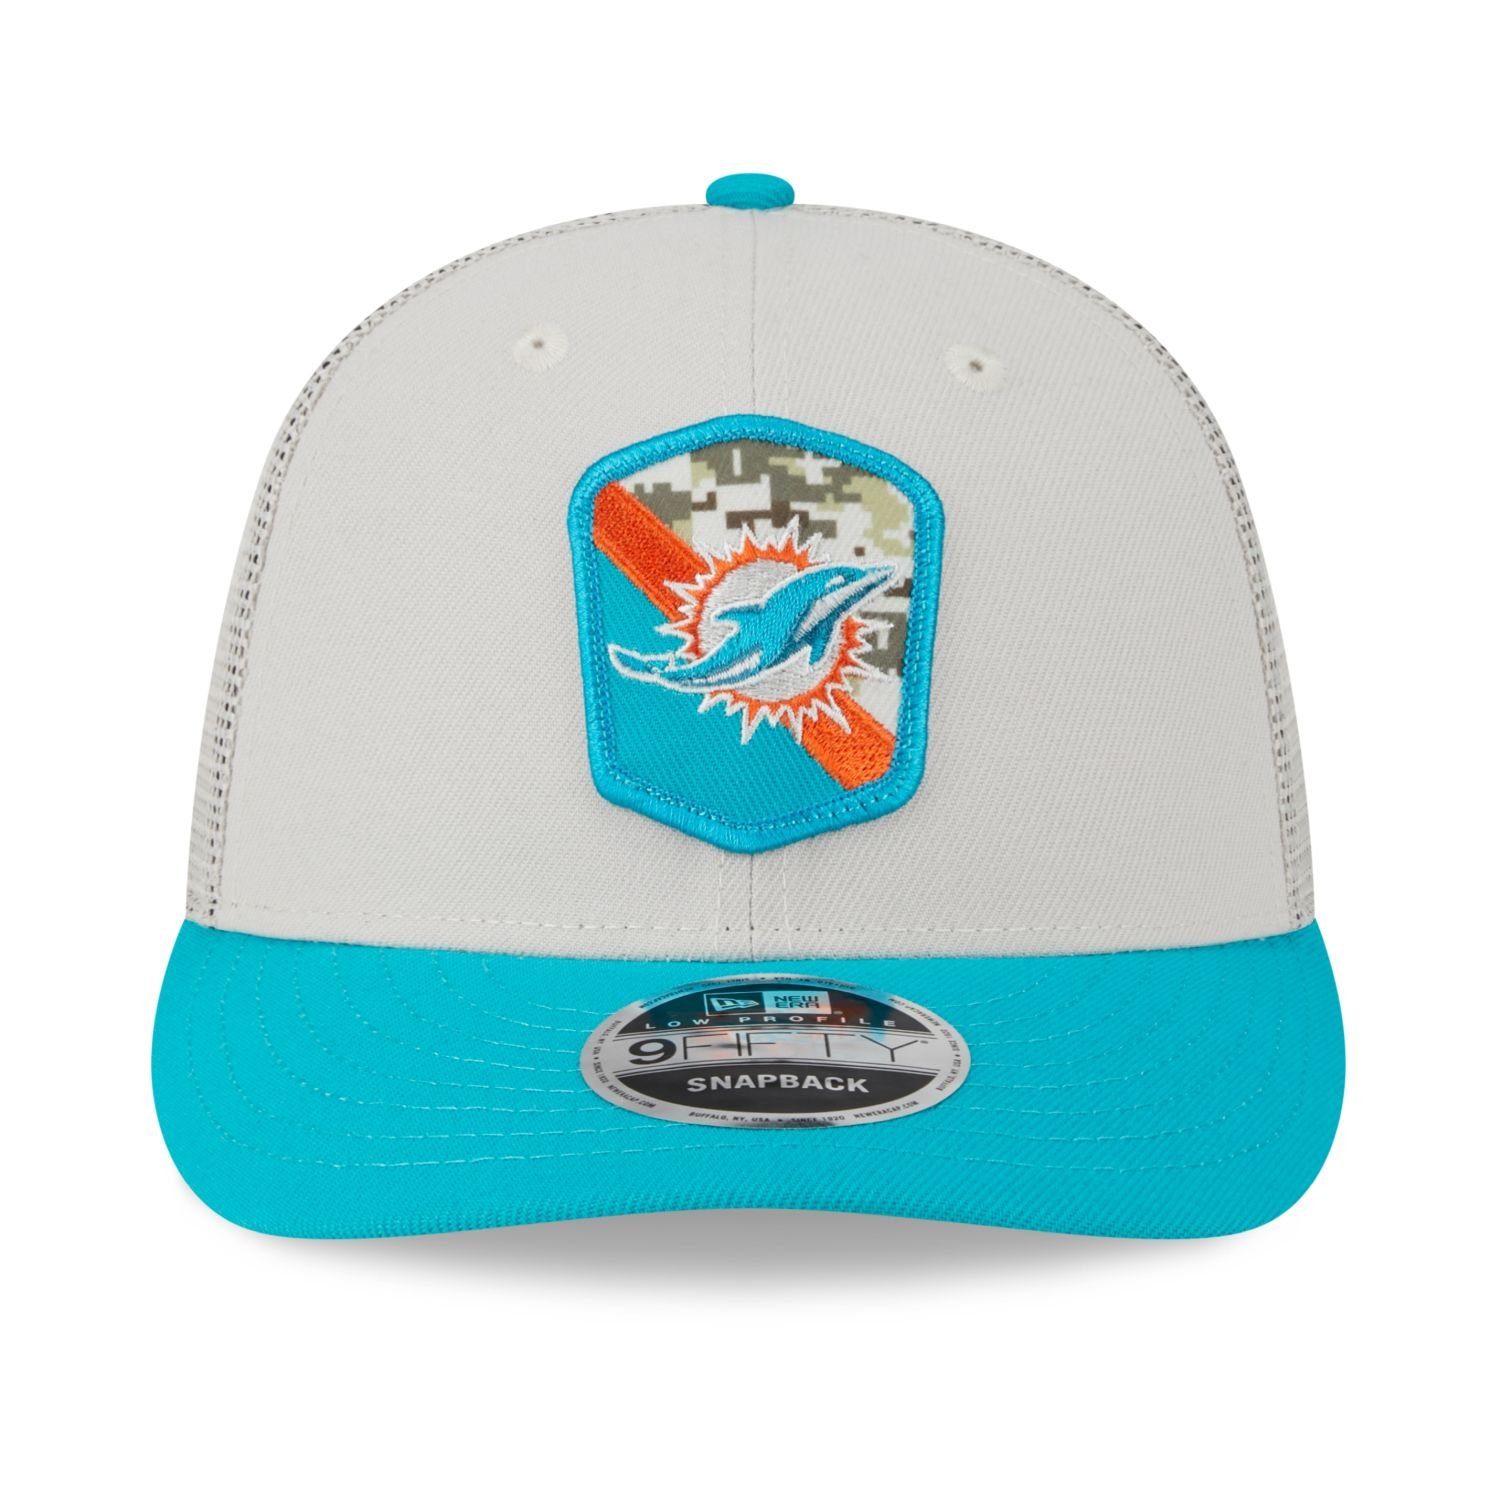 New Era Snapback Cap Dolphins to Profile Miami NFL 9Fifty Snap Service Low Salute